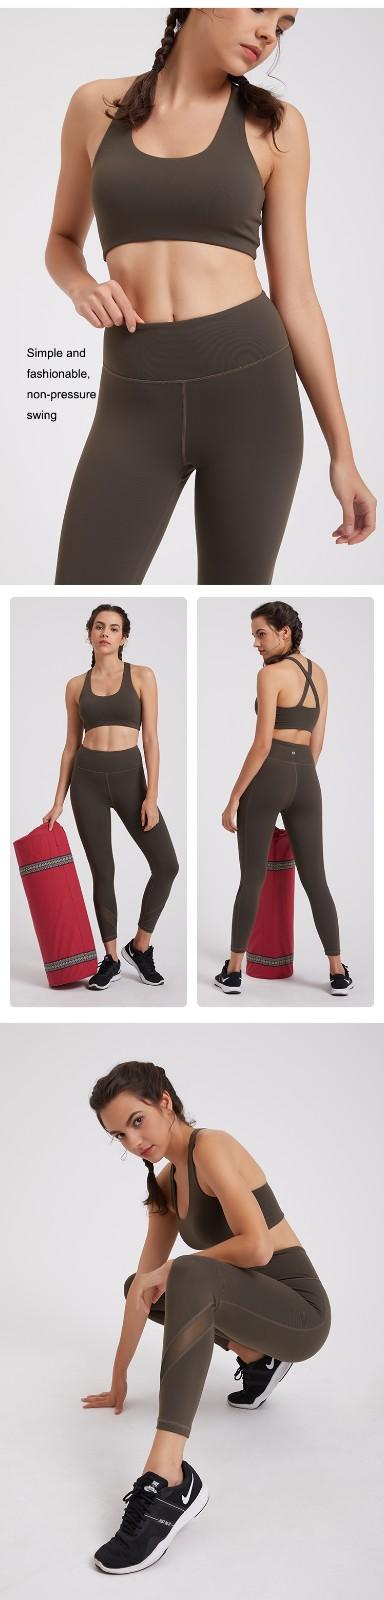 INGOR fashion casual yoga pants outfits for manufacturer for sport